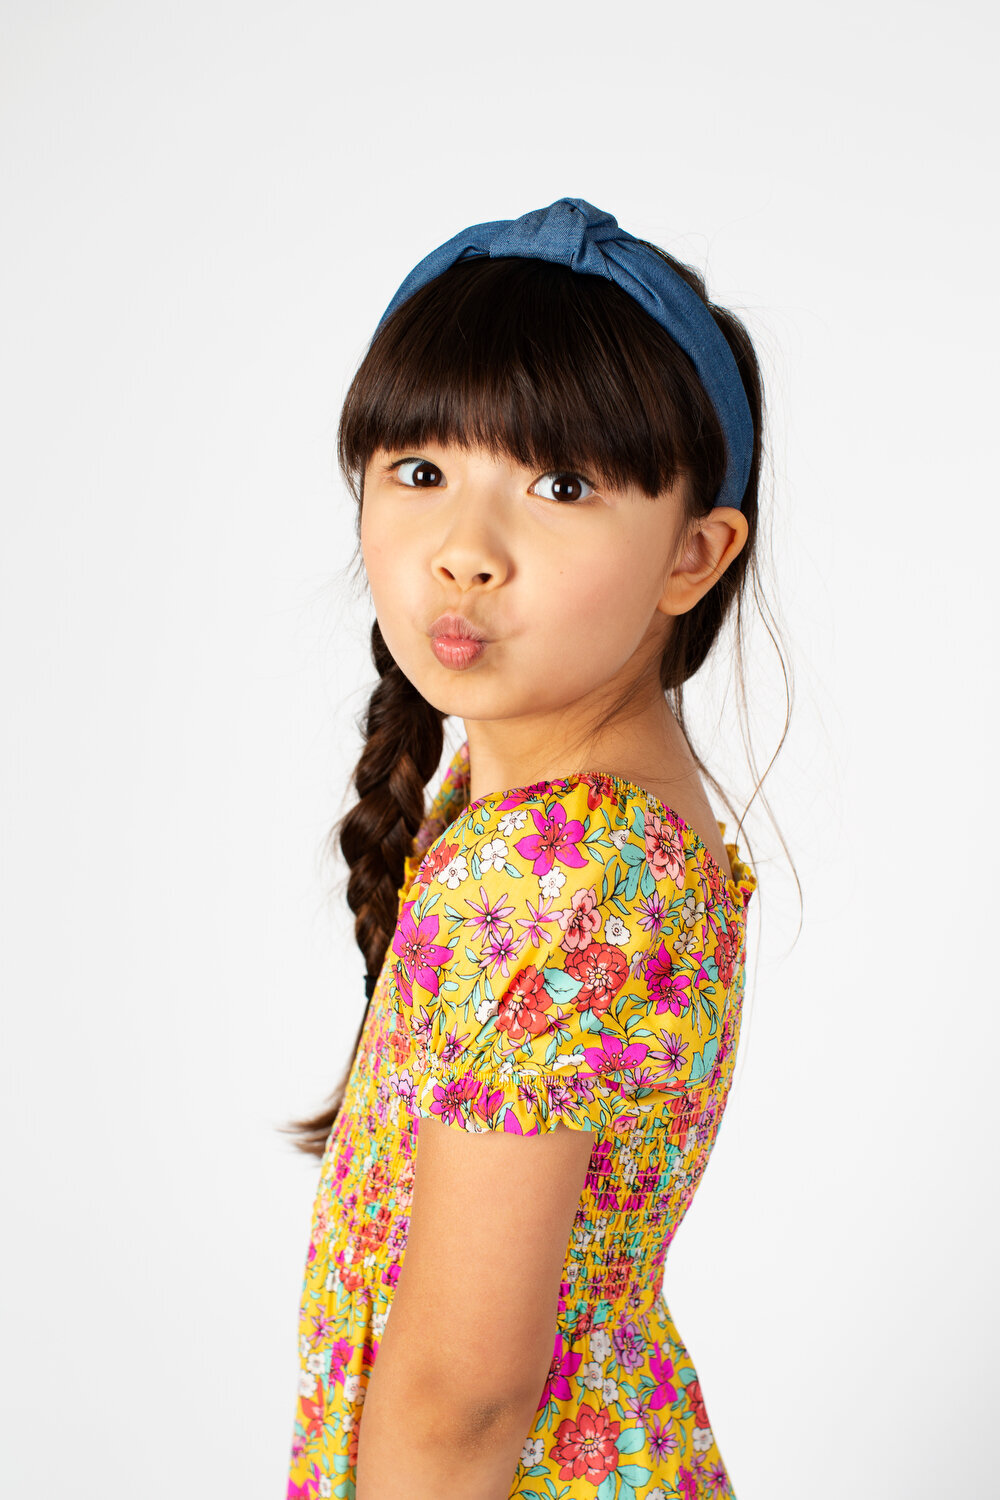 Greer Rivera Photography Kids Editorial Photoshoots Marin CA Girl in flower outfit and headband making a silly face